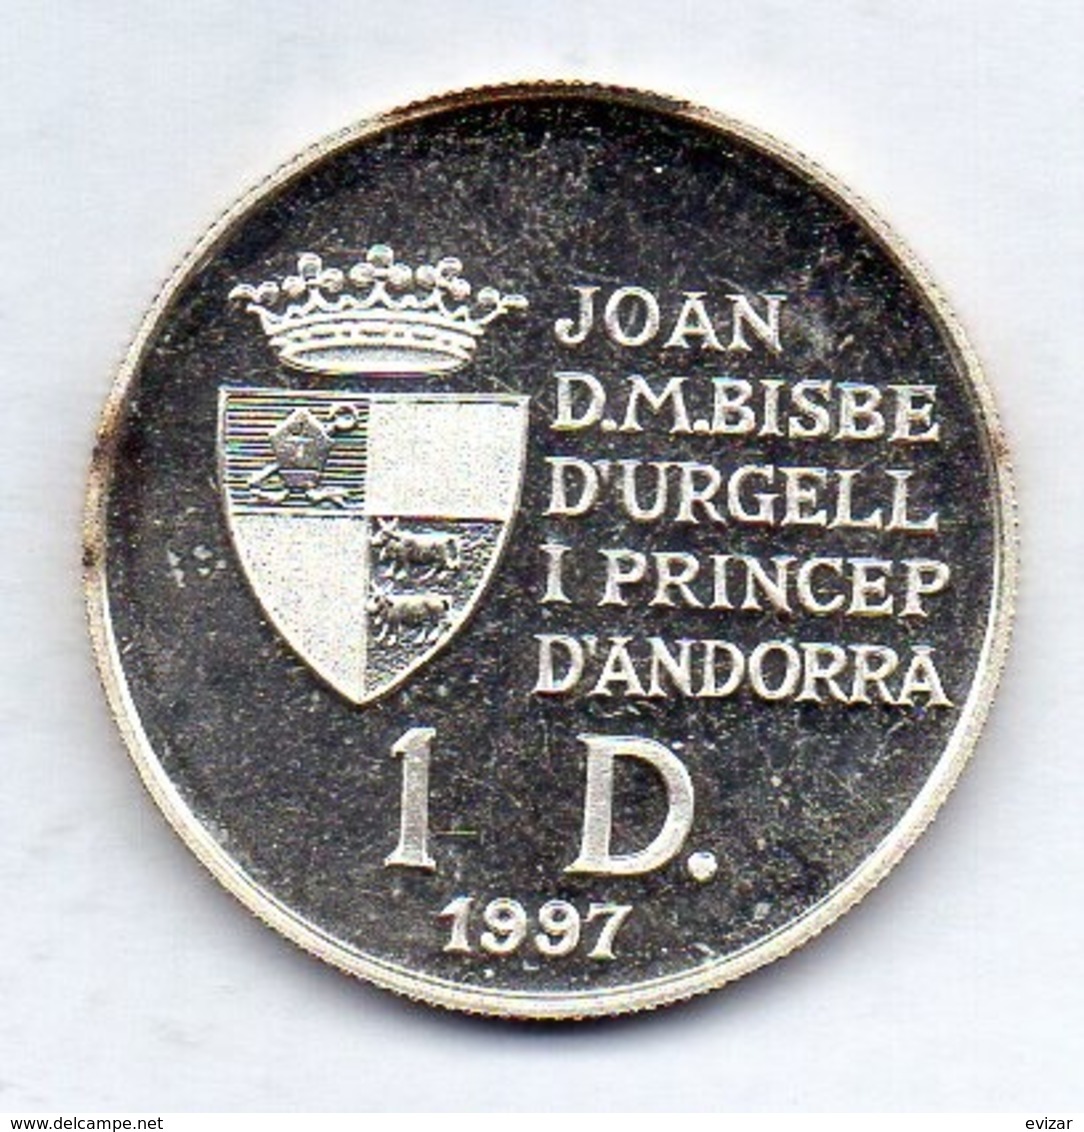 ANDORRA, 1 Diner, Silver, Year 1997, KM #127, Proof. - Andorre